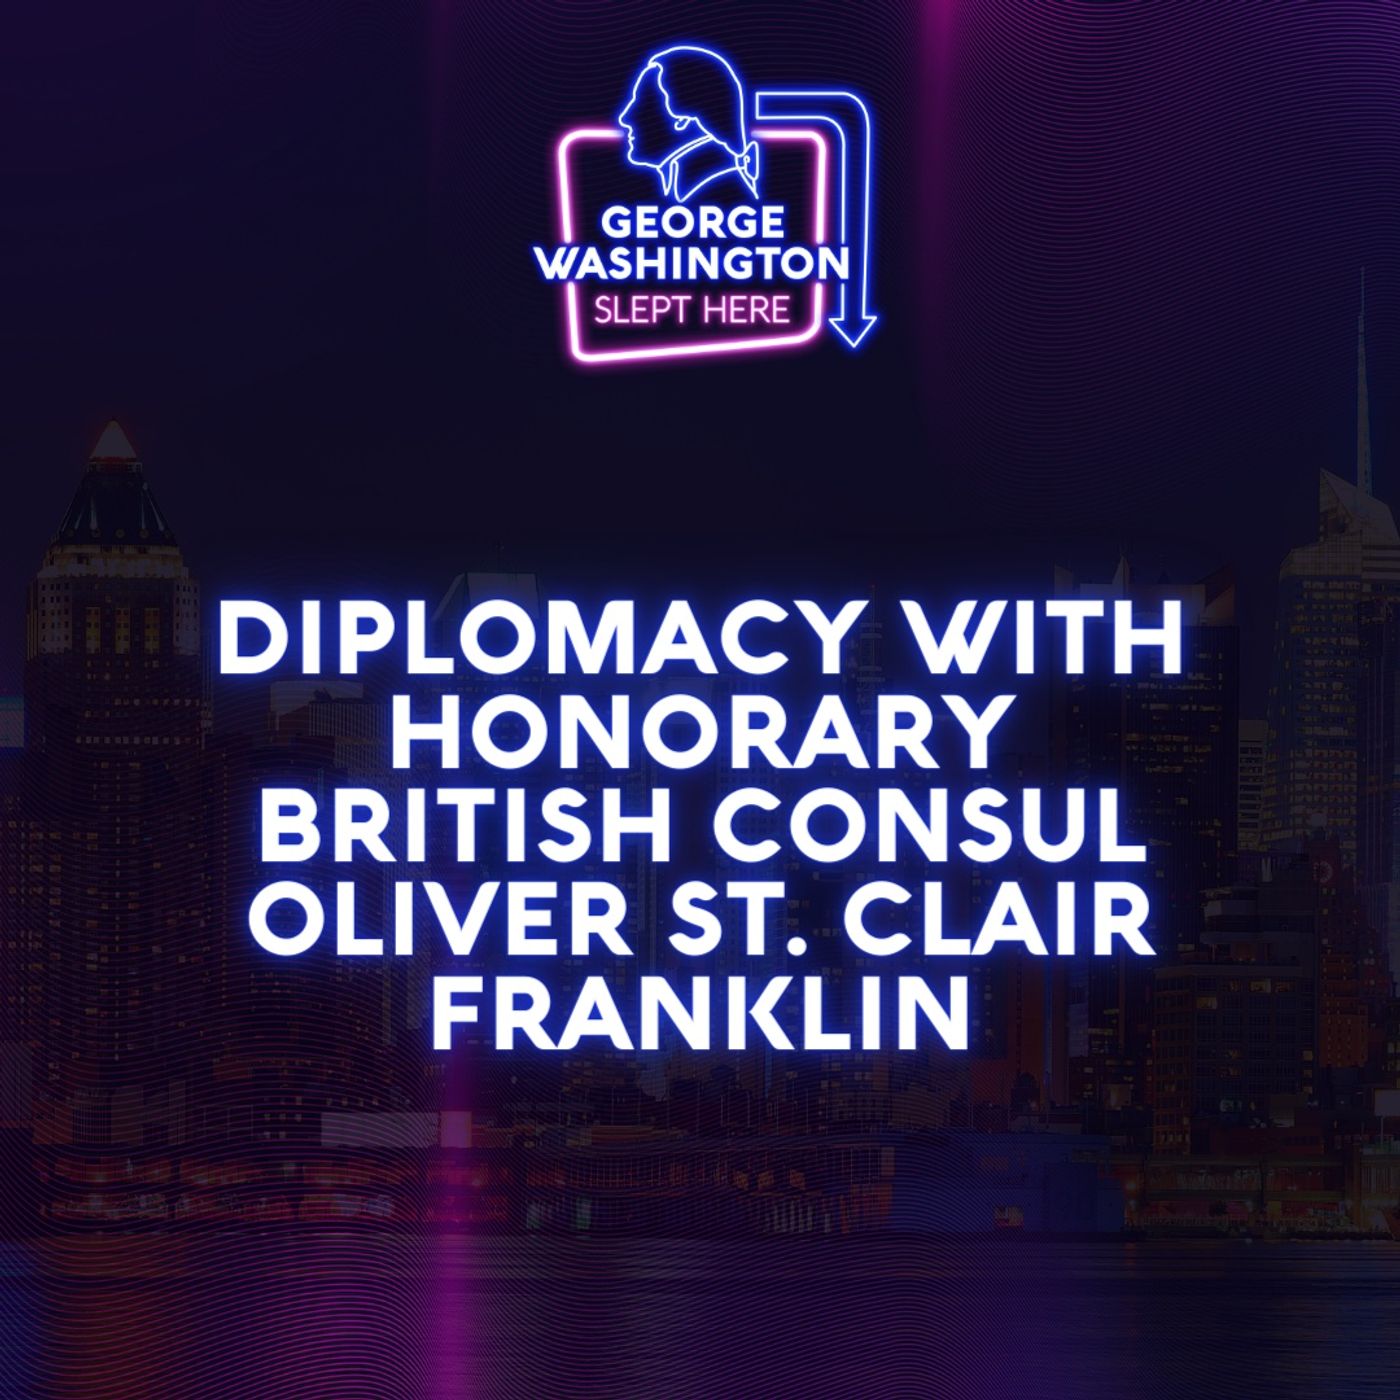 Diplomacy with Honorary British Consul Oliver St. Clair Franklin